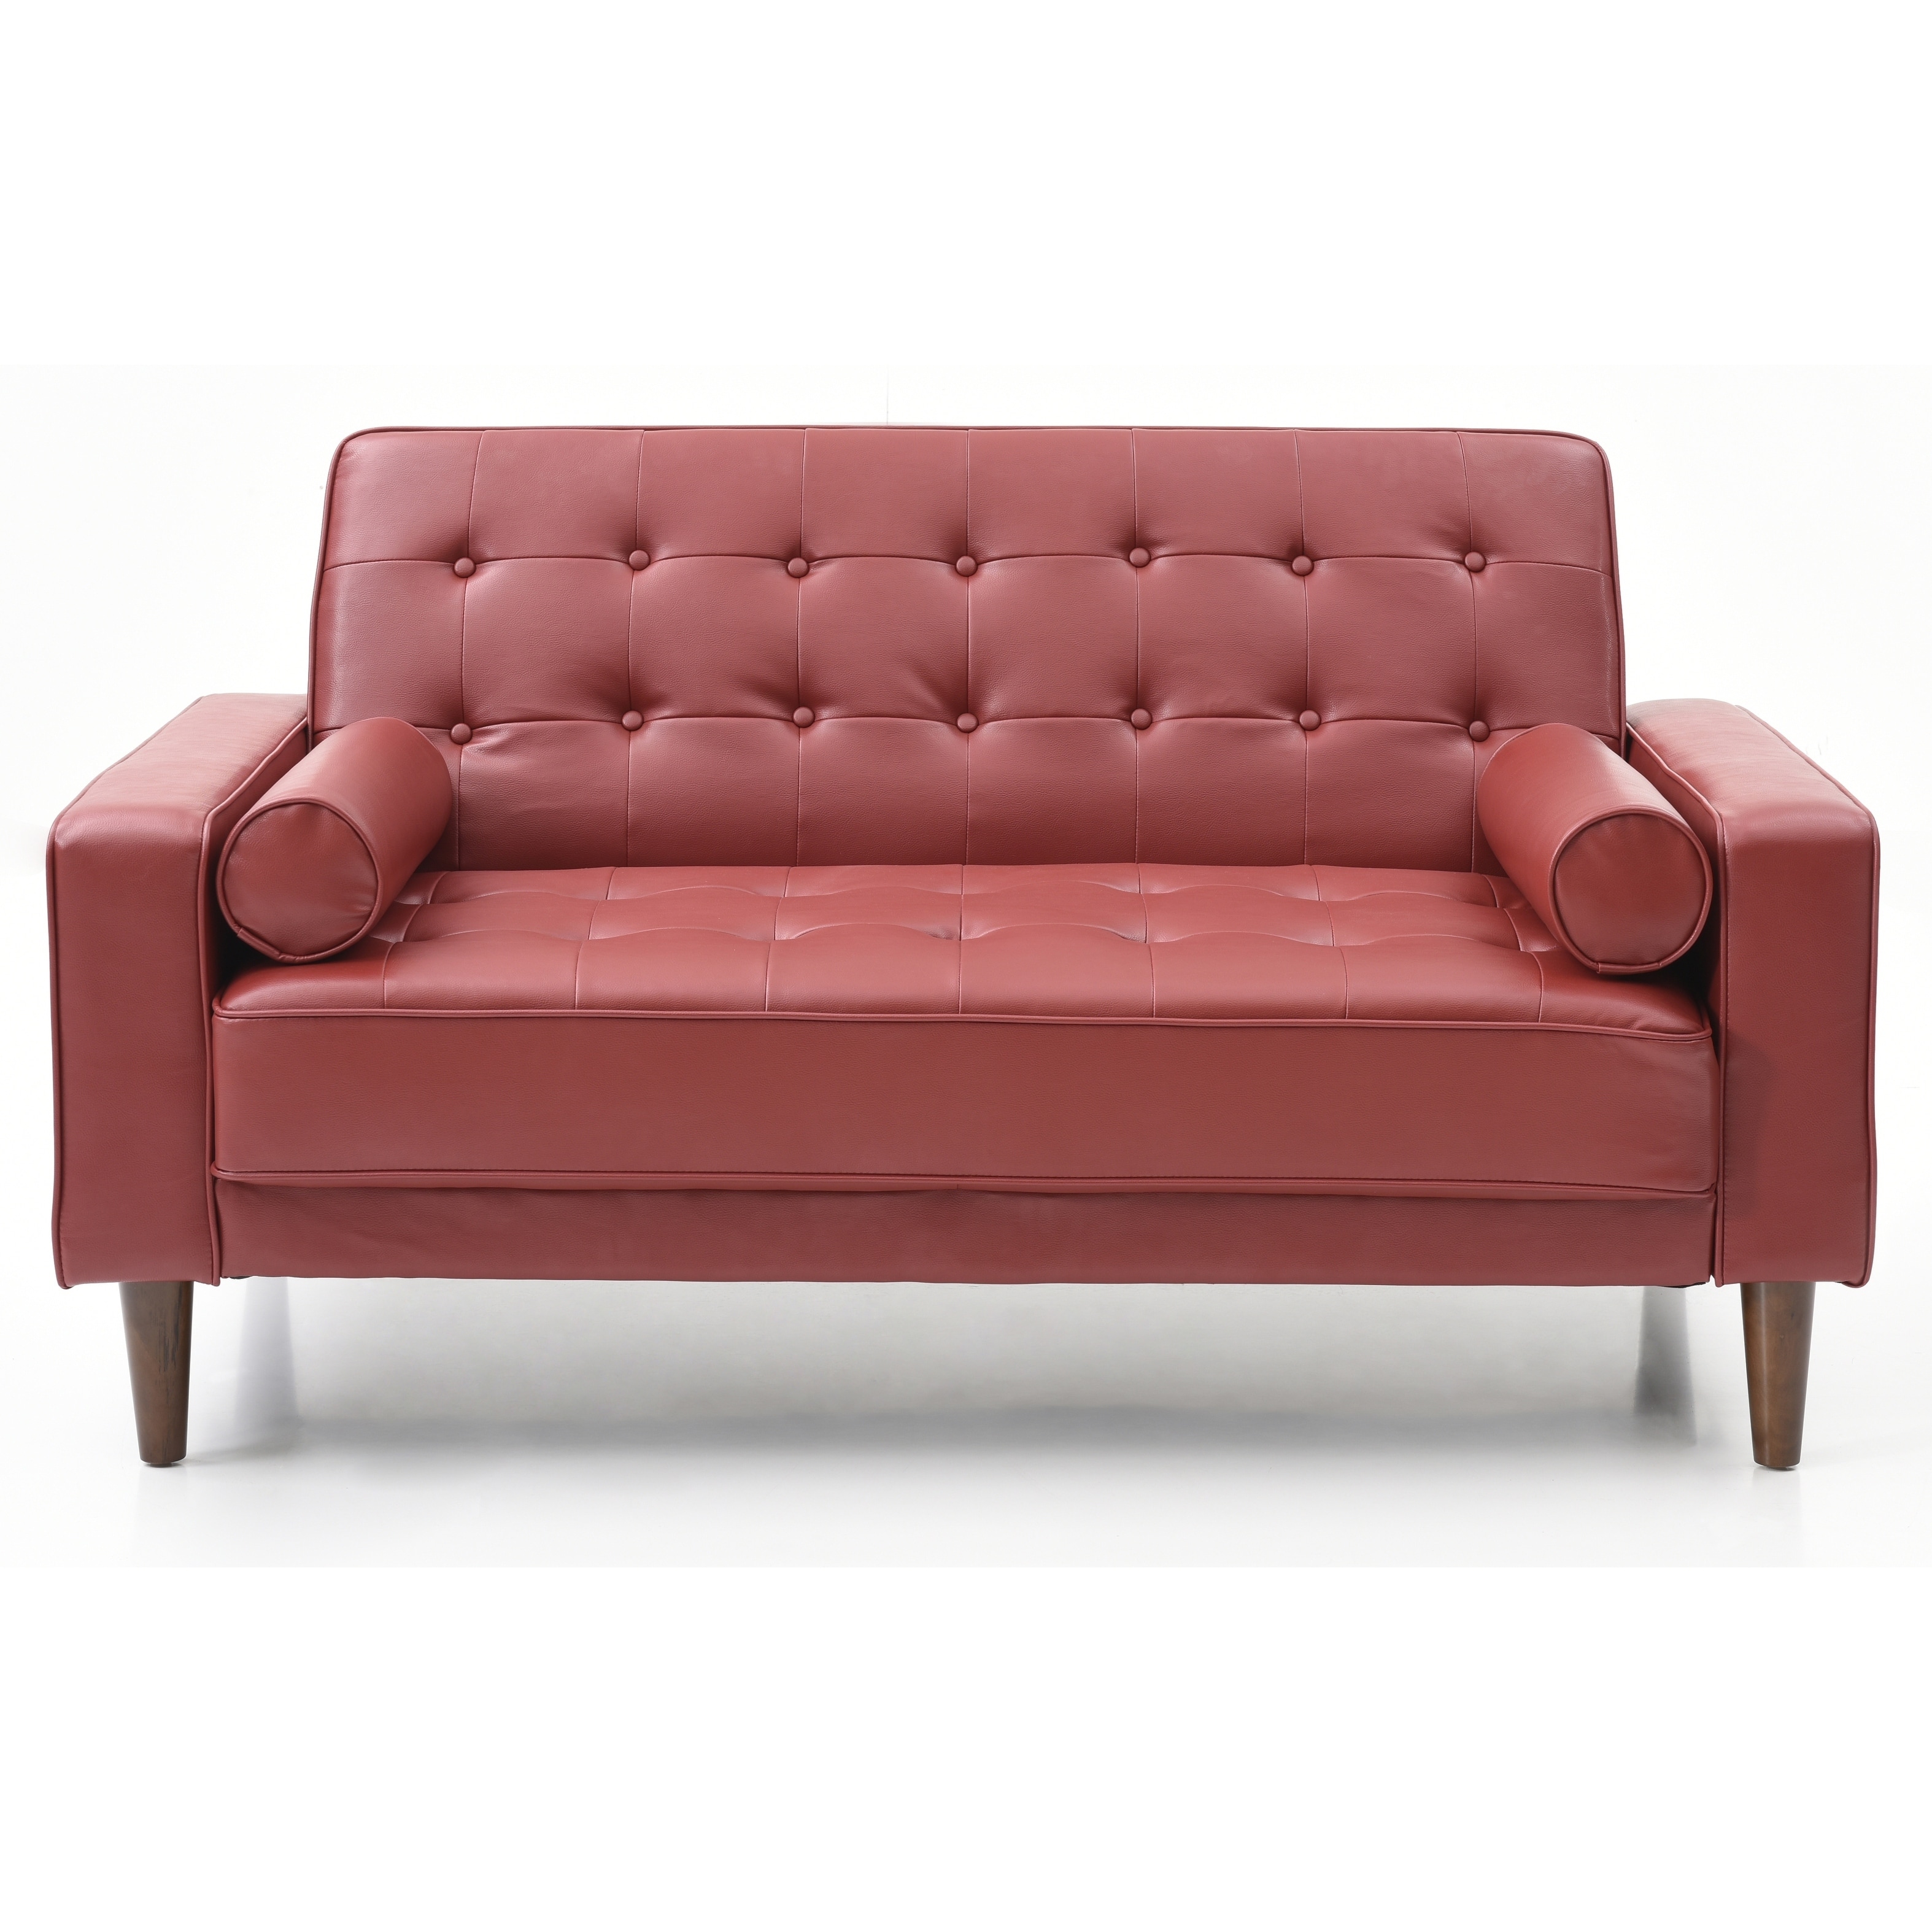 ruby and quiri fold out queen sofa bed